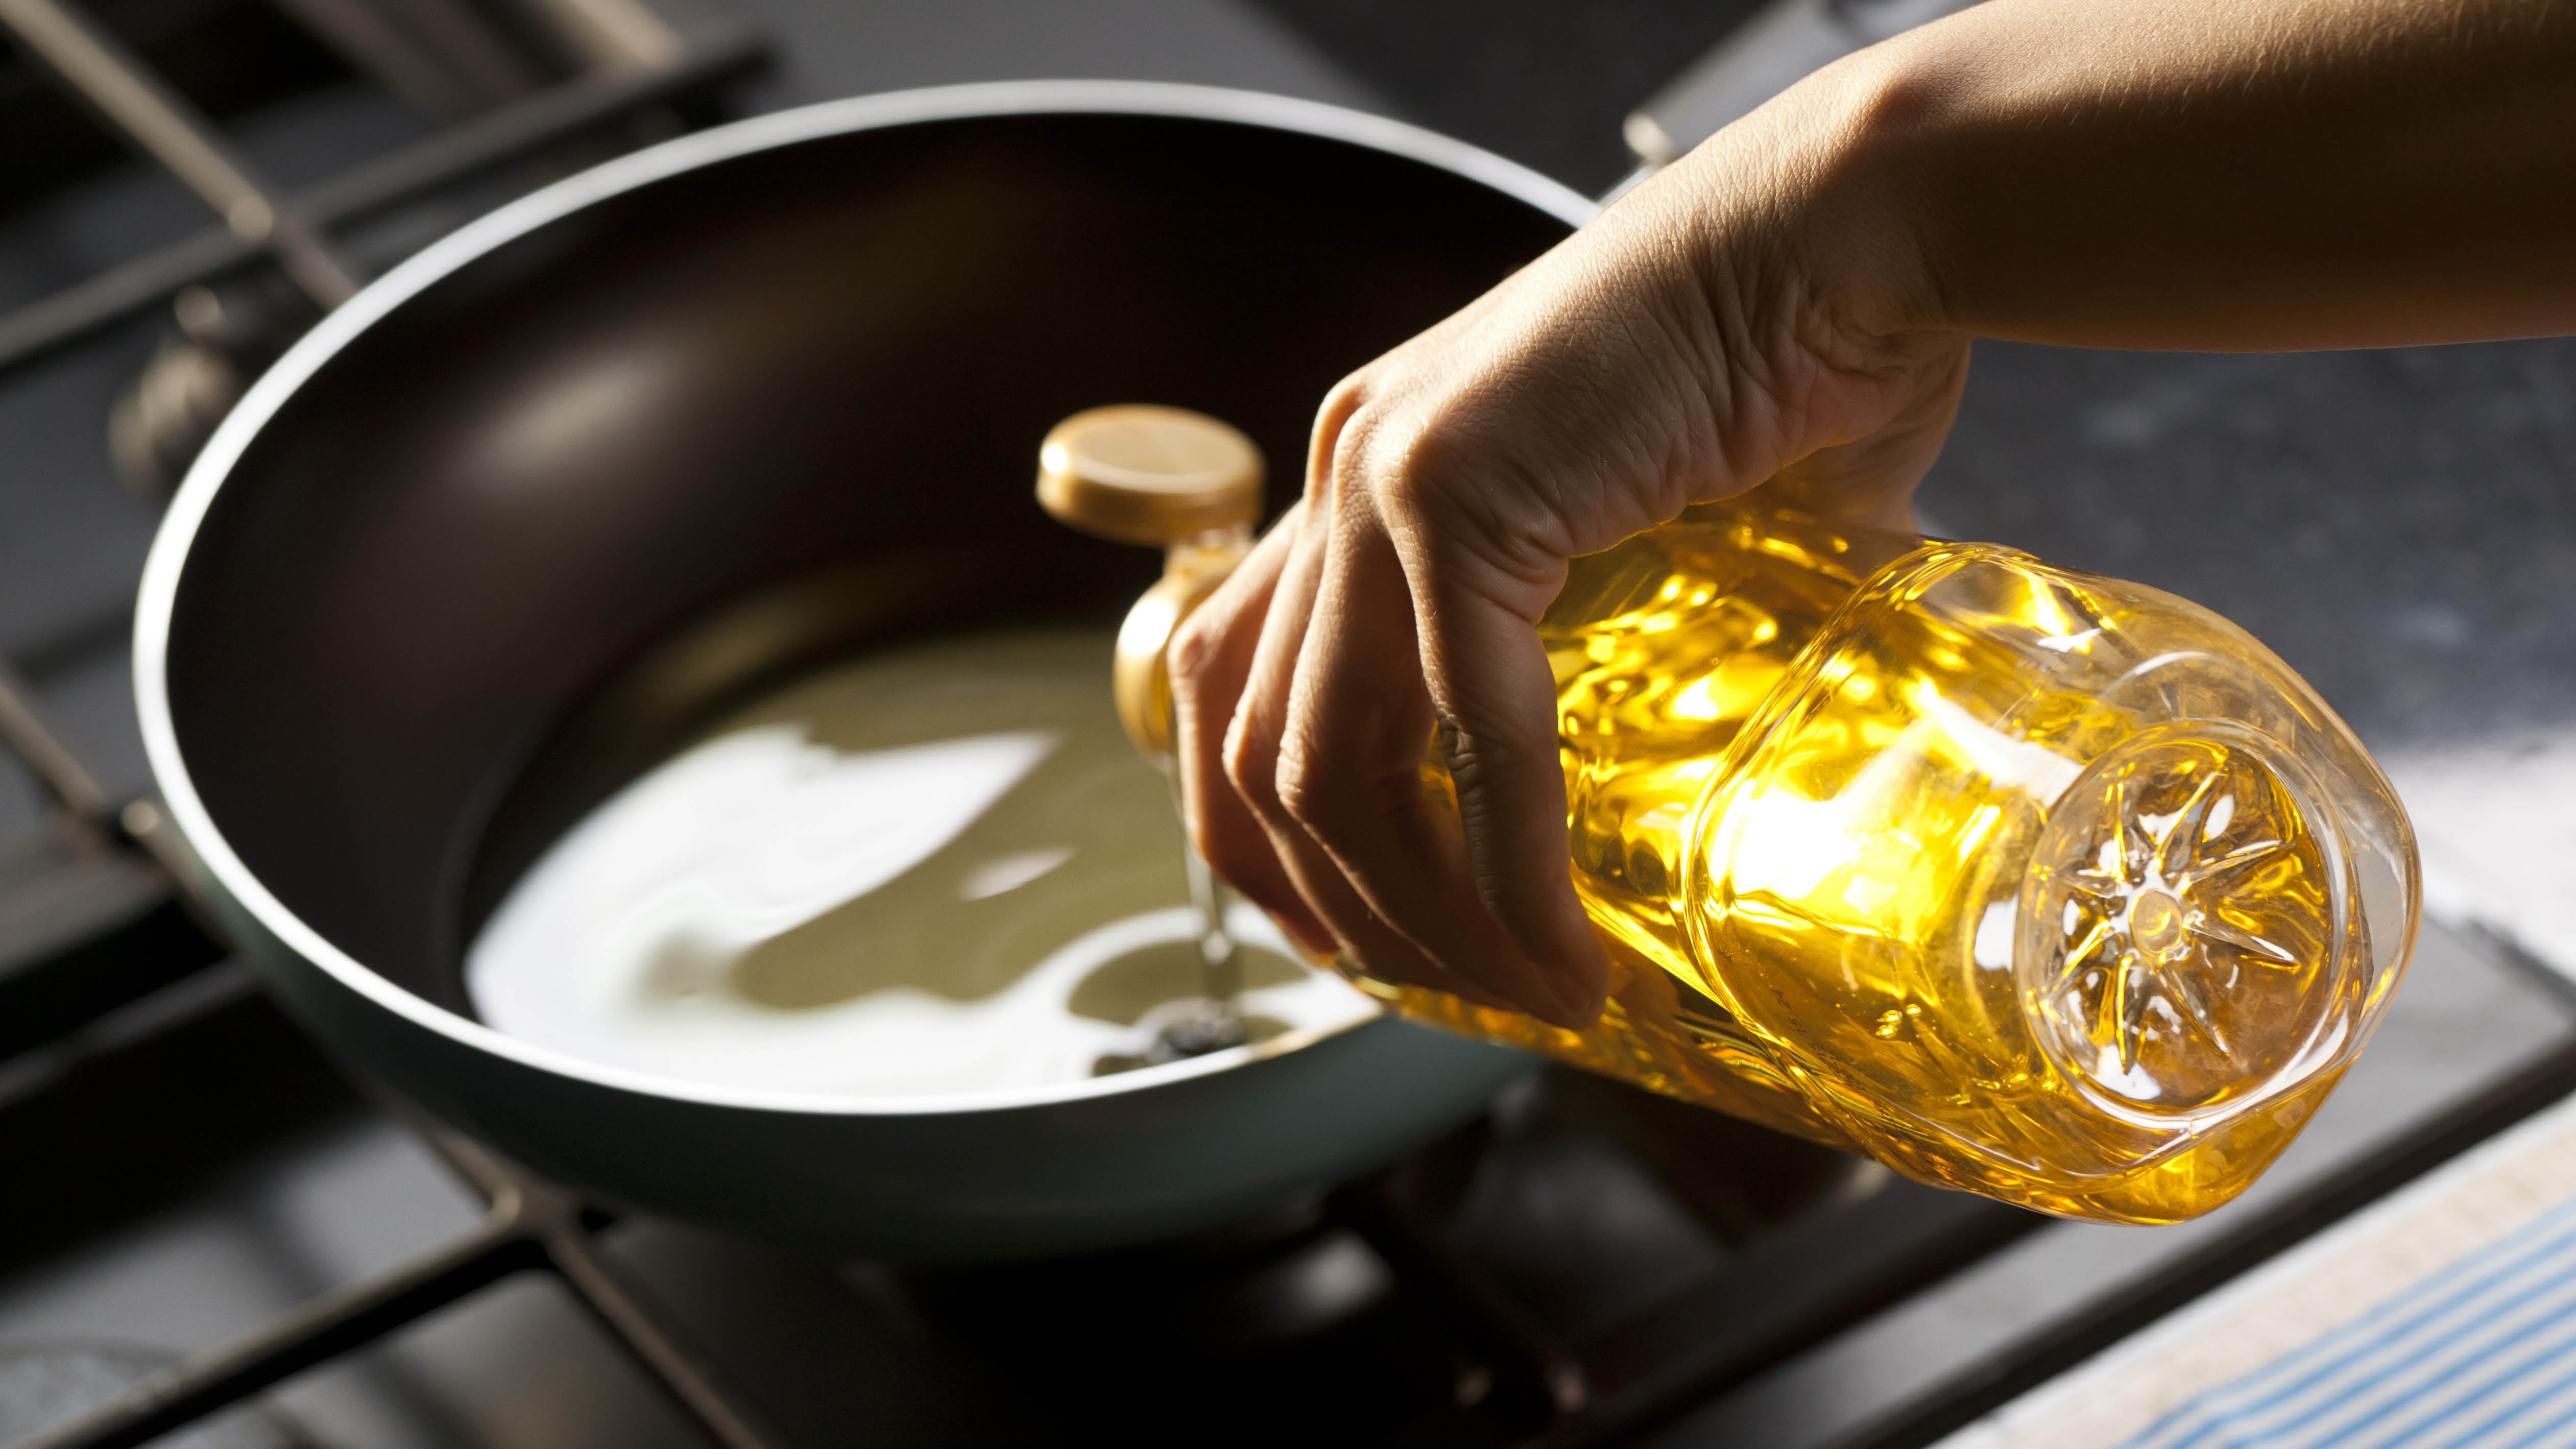 Pouring oil in a frying pan